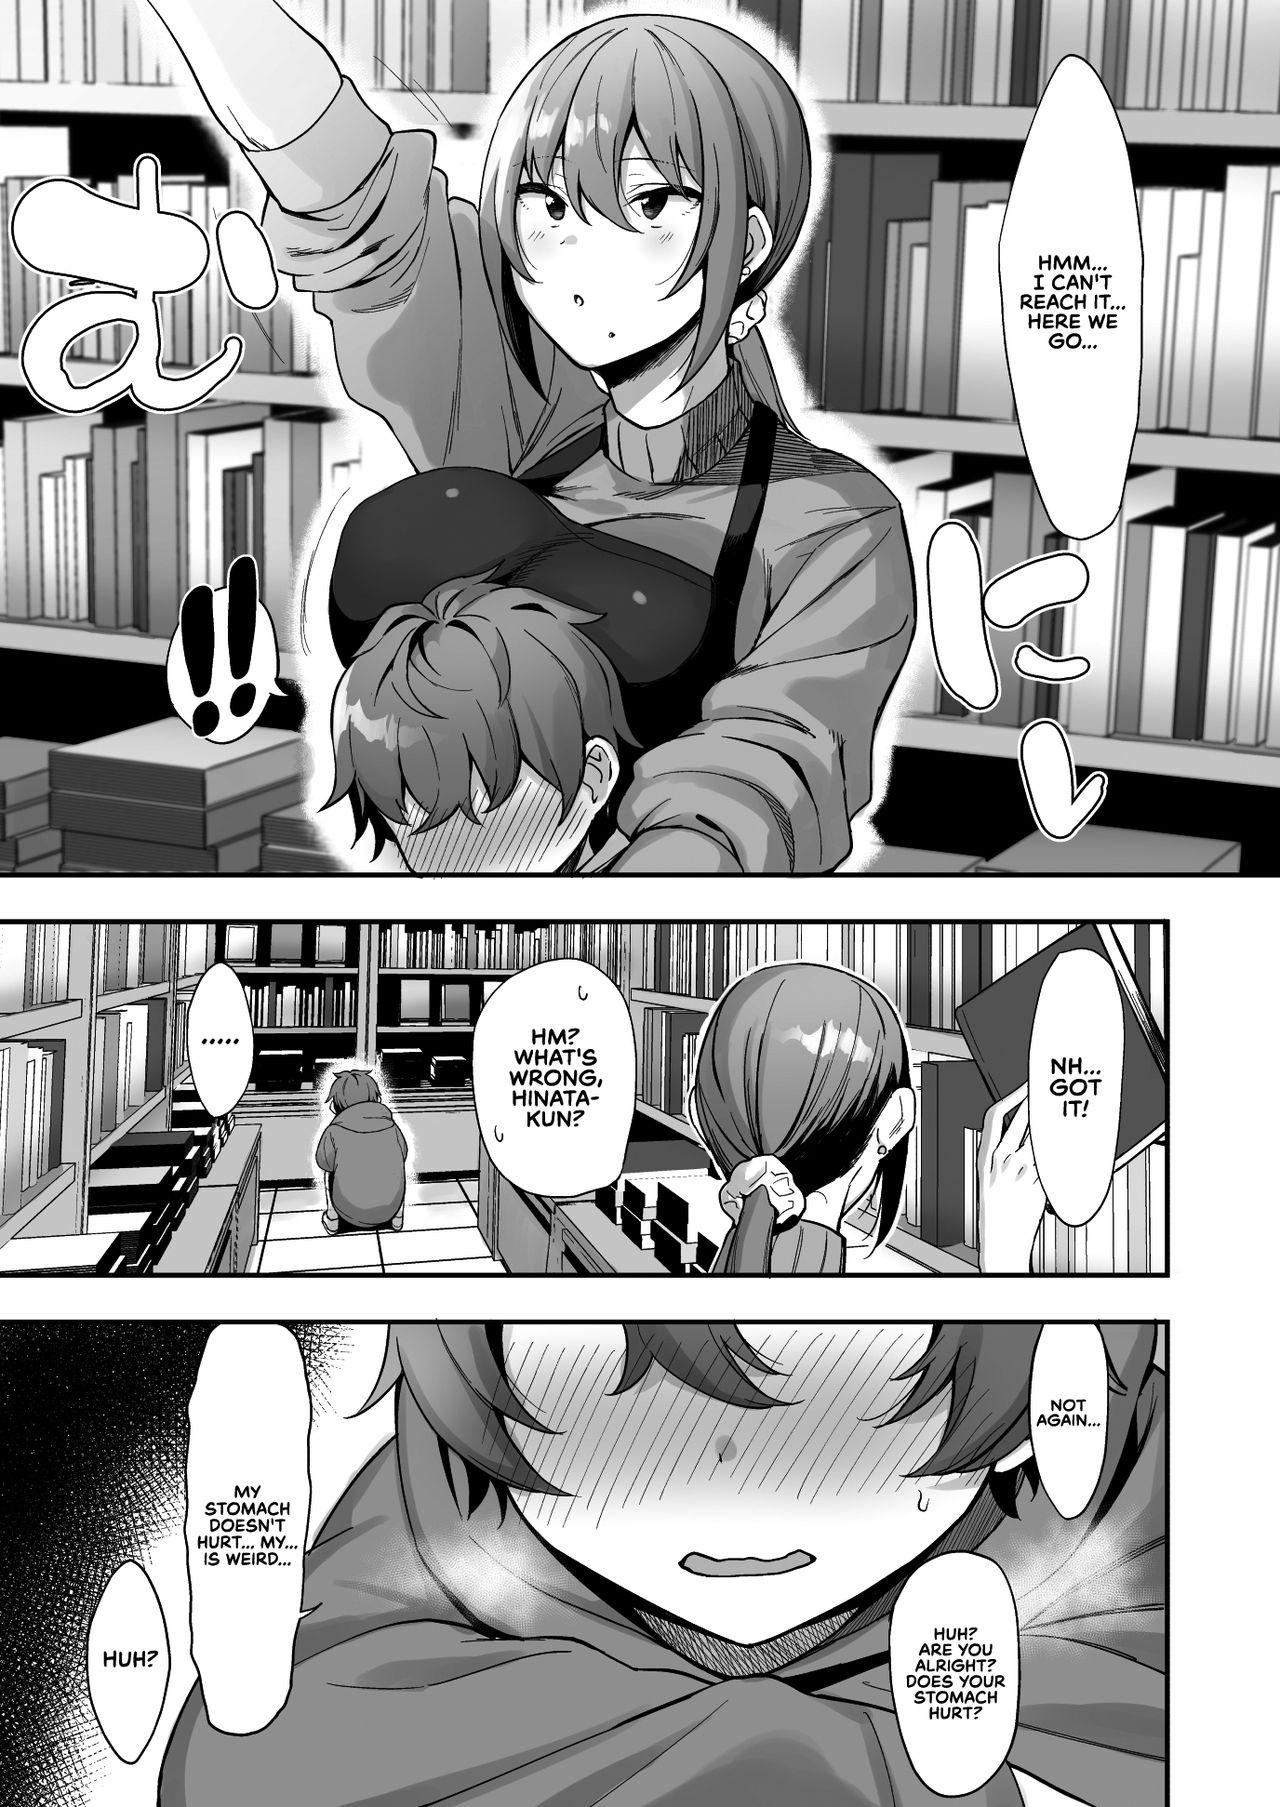 Socks Furuhonya no Onee-san to | With The Lady From The Used Book Shop - Original Fuck Hard - Page 8